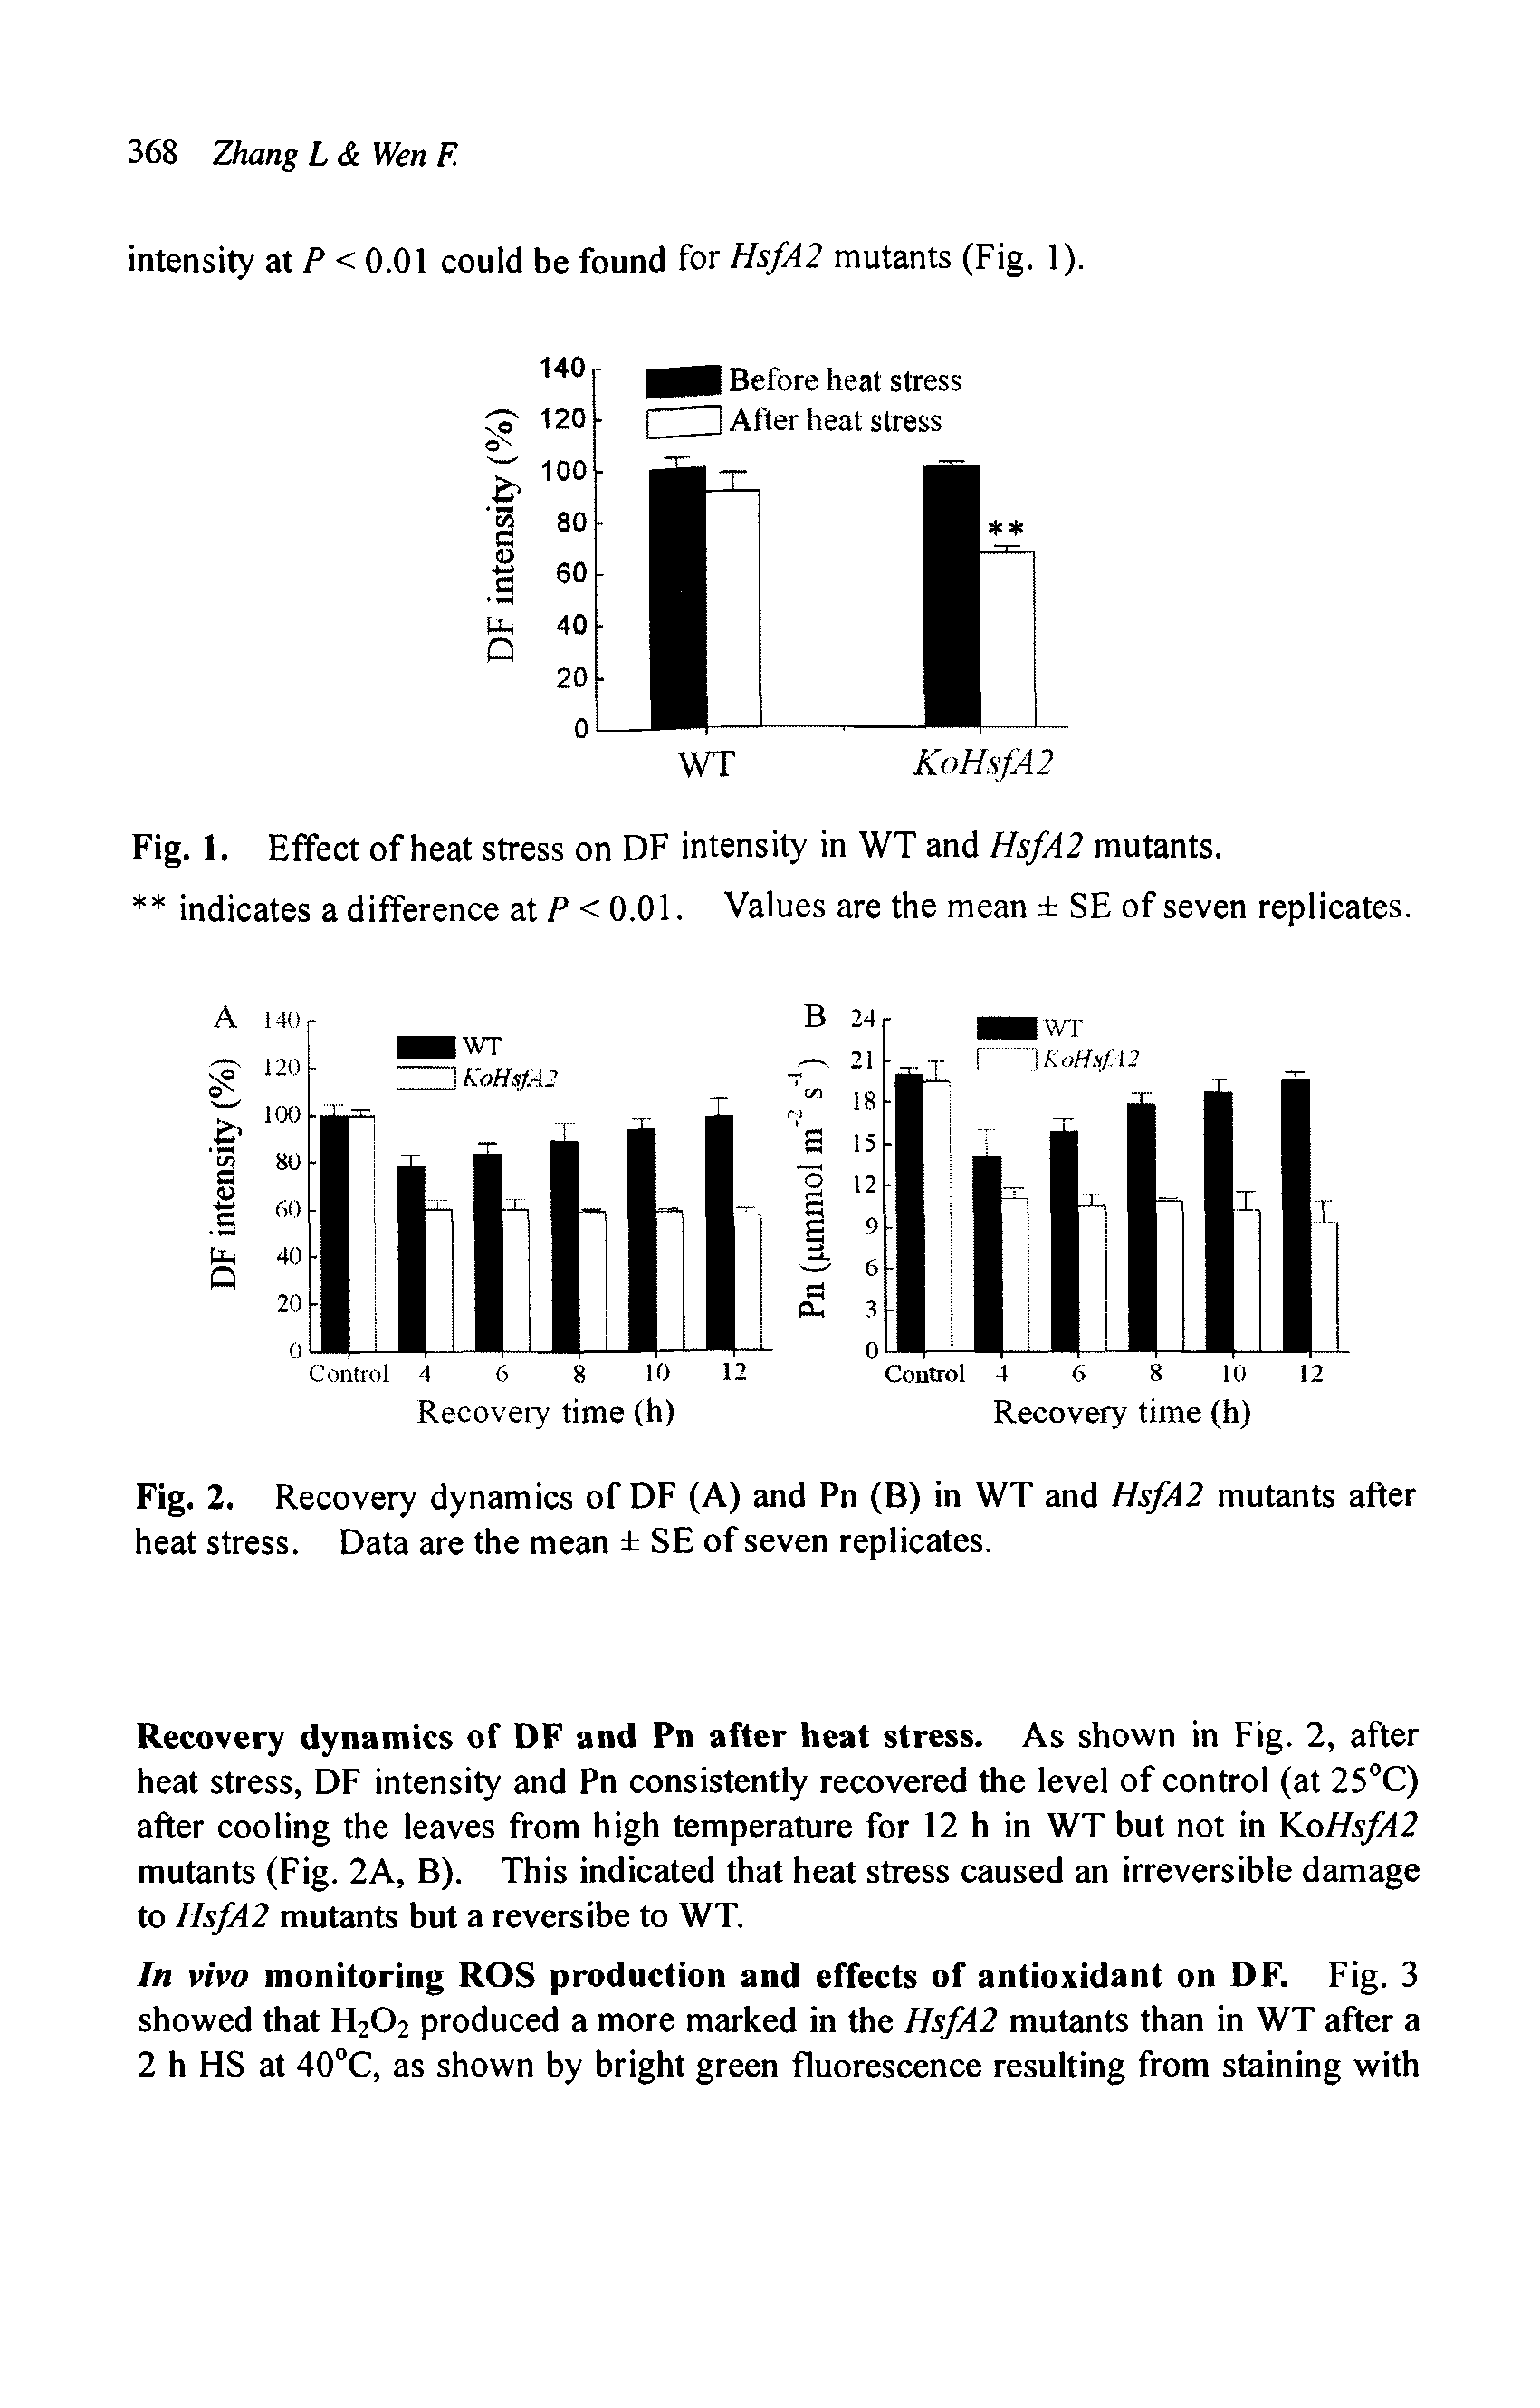 Fig. 1. Effect of heat stress on DF intensity in WT and HsfA2 mutants.